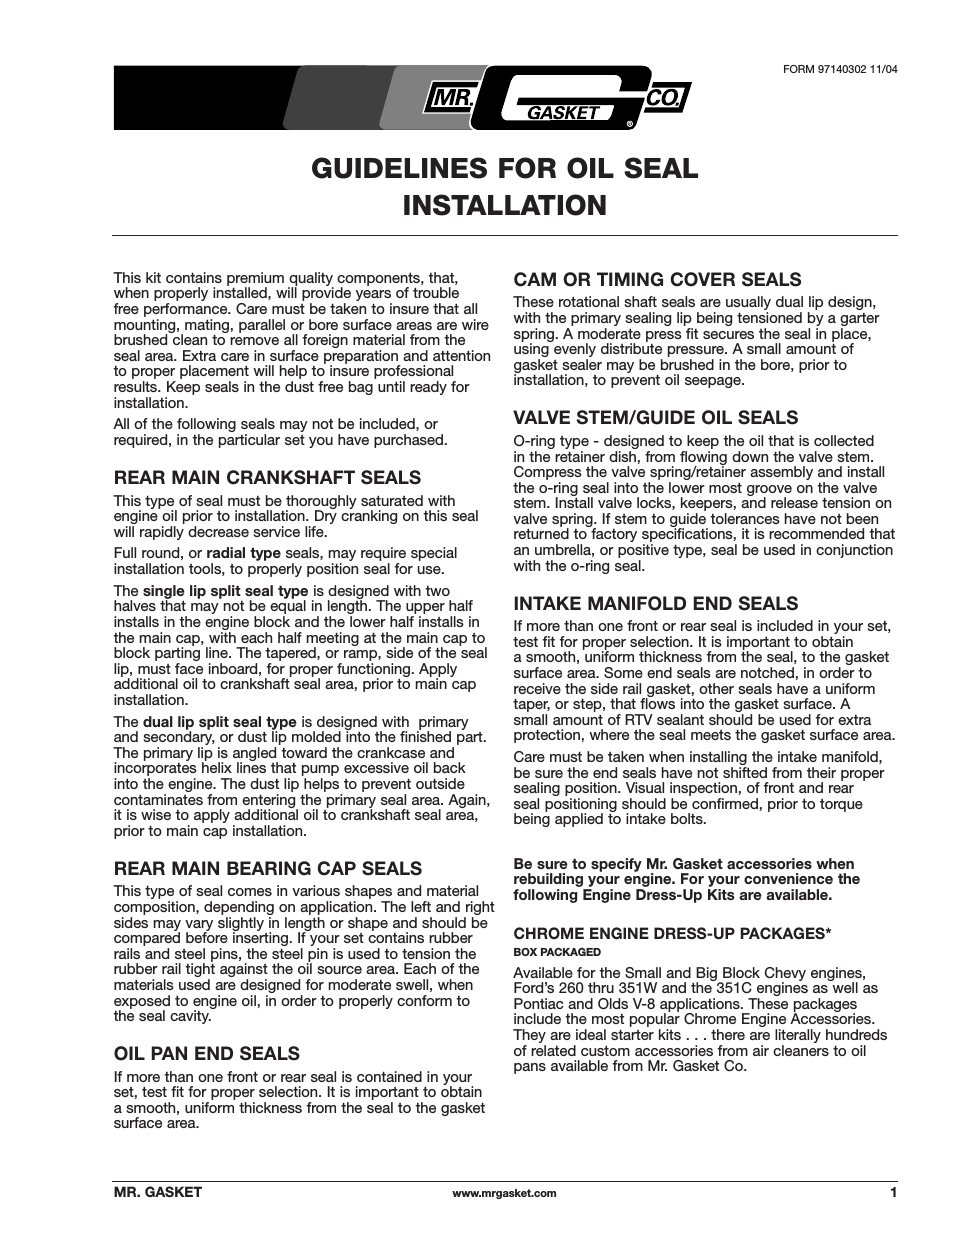 All Oil Seal Installation Guidelines